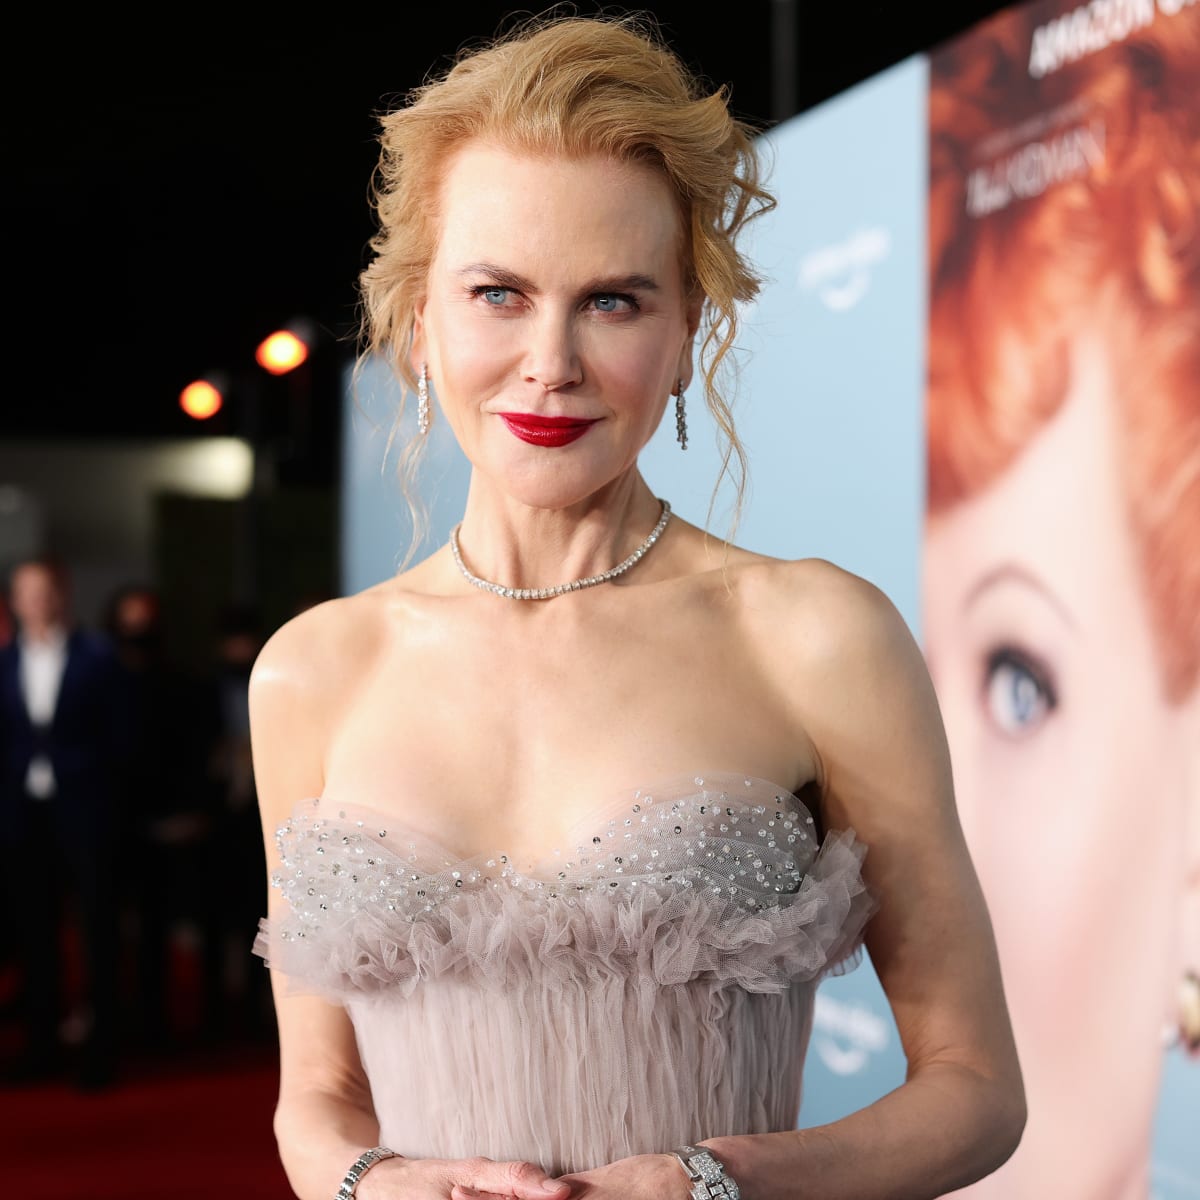 Nicole Kidman Looks Like a Fairy Princess Emerging From a Wintry Forest in  This Gown - Fashionista